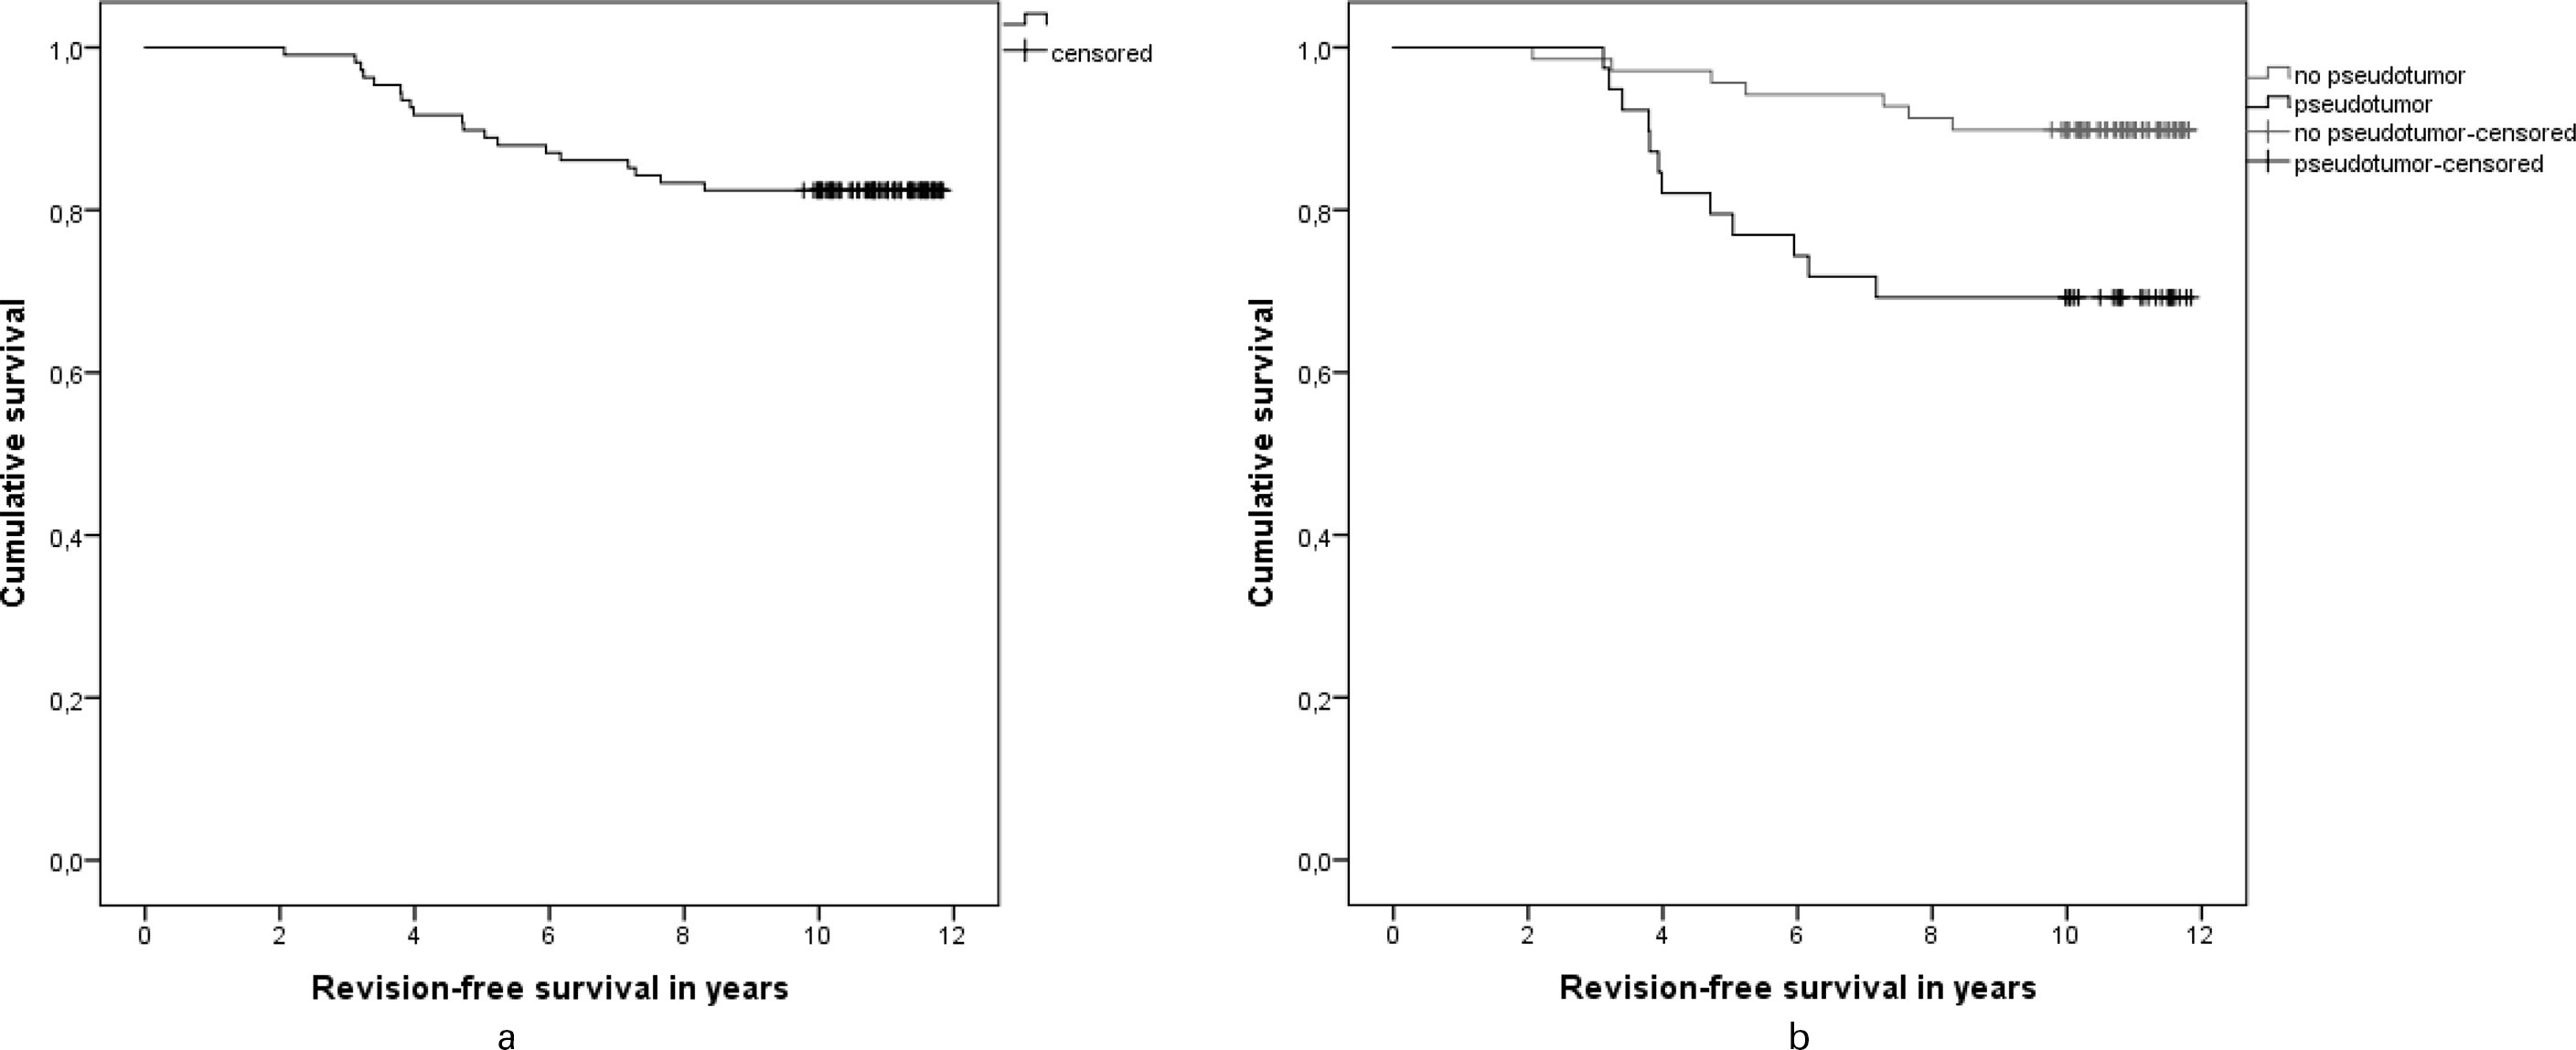 Fig. 2 
            a) Kaplan-Meier implant survival estimate for revision-free survival (all revision causes).b) Kaplan-Meier implant survival analysis for pseudotumour and without pseudotumour (p = 0.005, log-rank test).
          